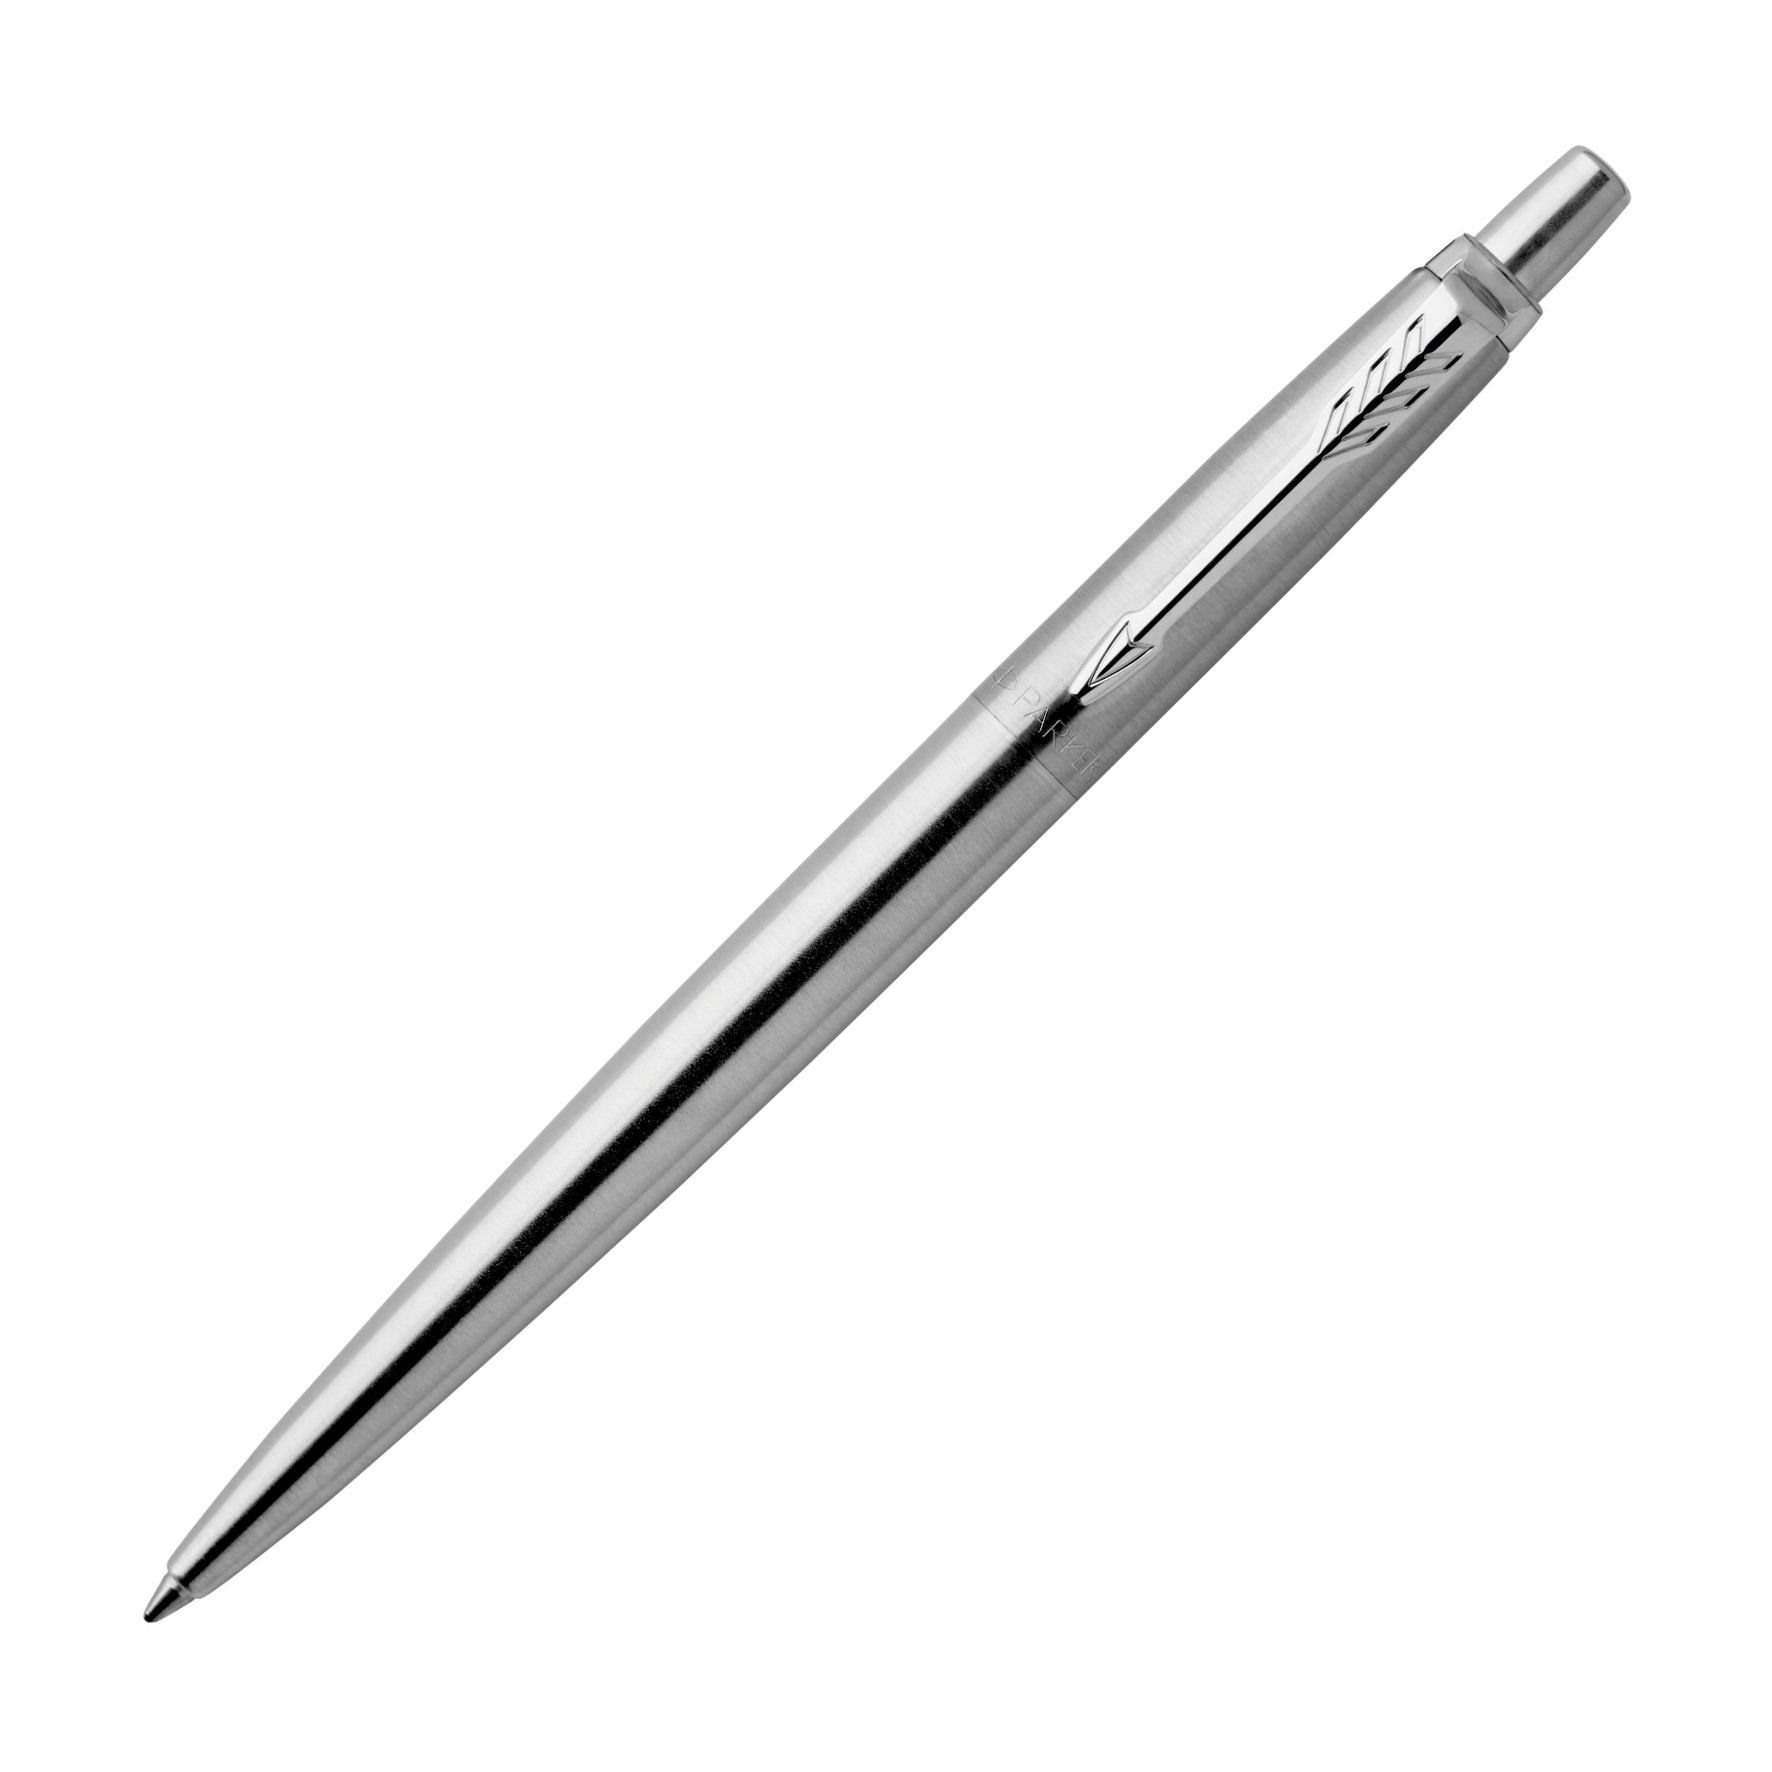 1953344 Metal Pen Ballpoint Parker Jotter - Brushed Stainless CT